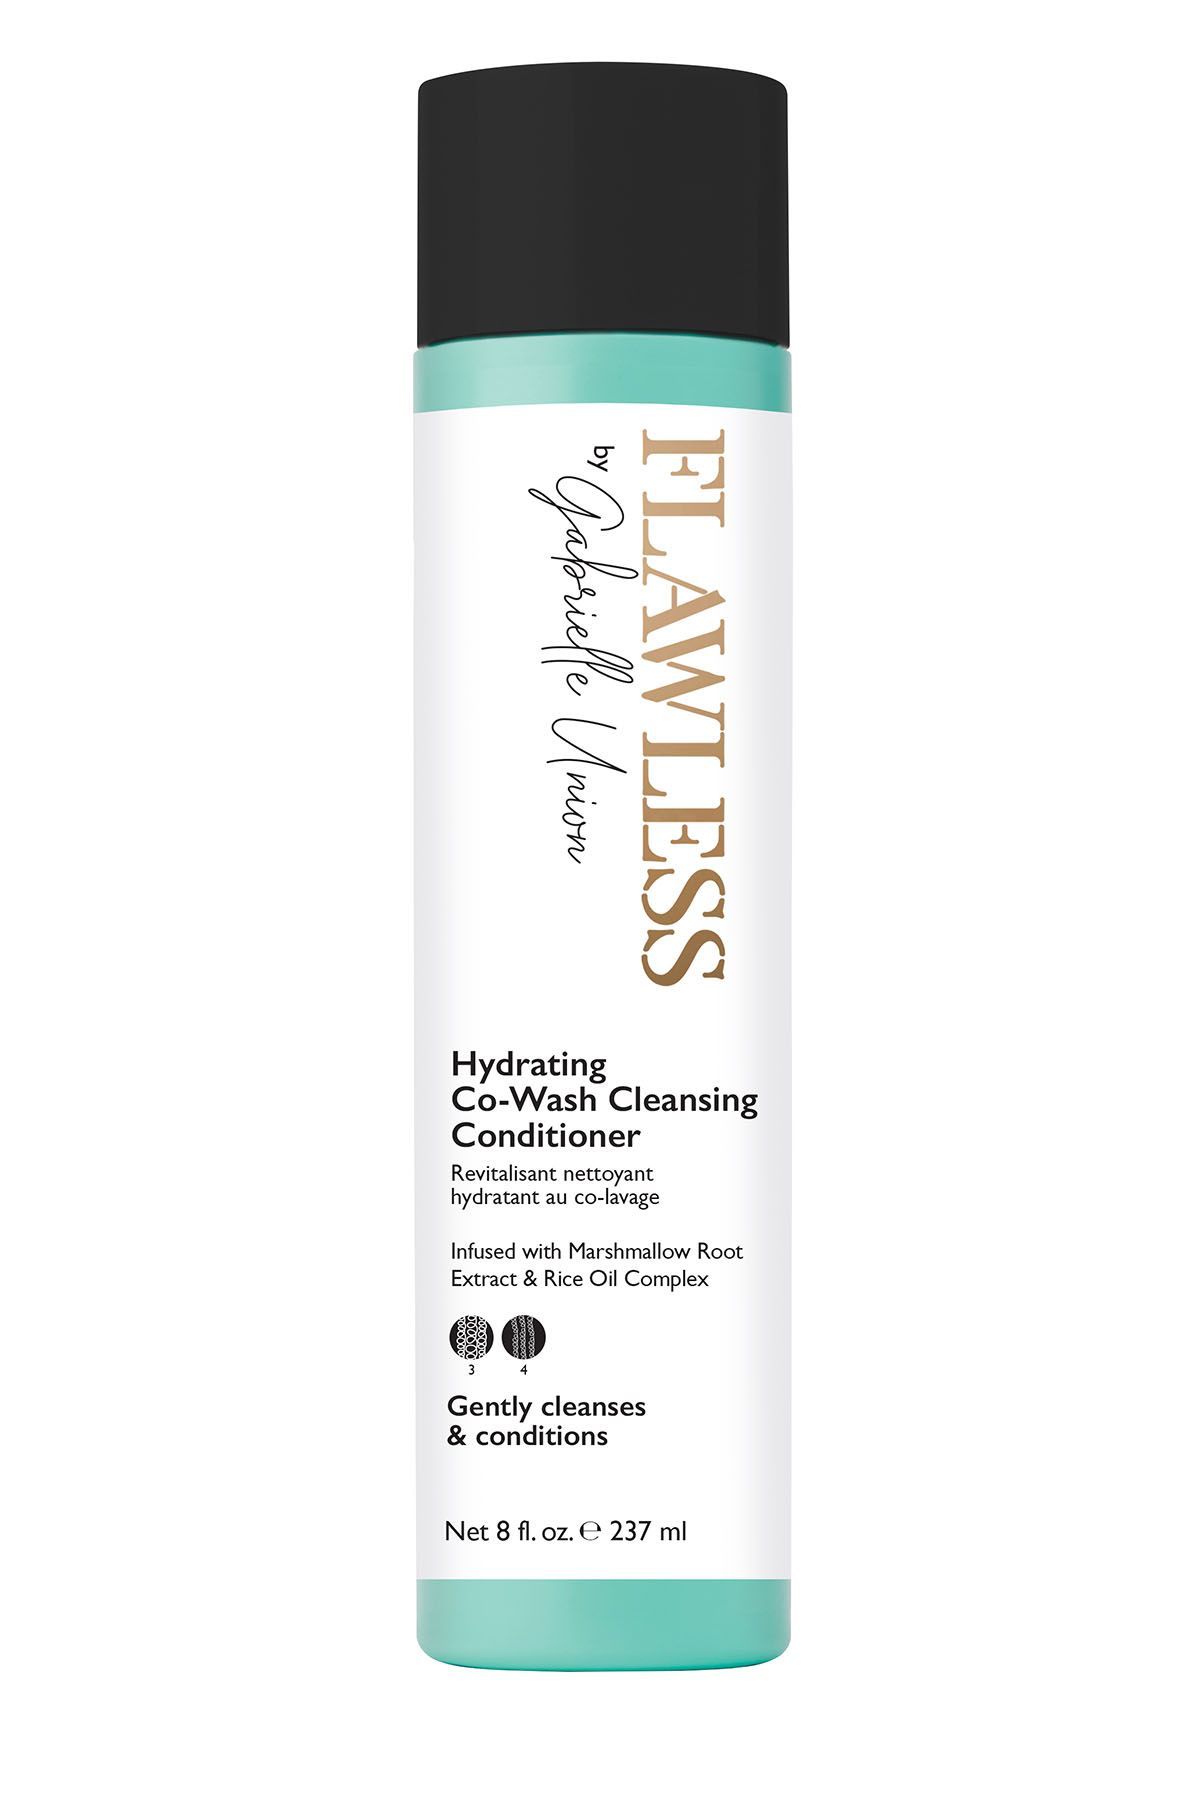 Hydrating Co-Wash Cleansing Conditioner